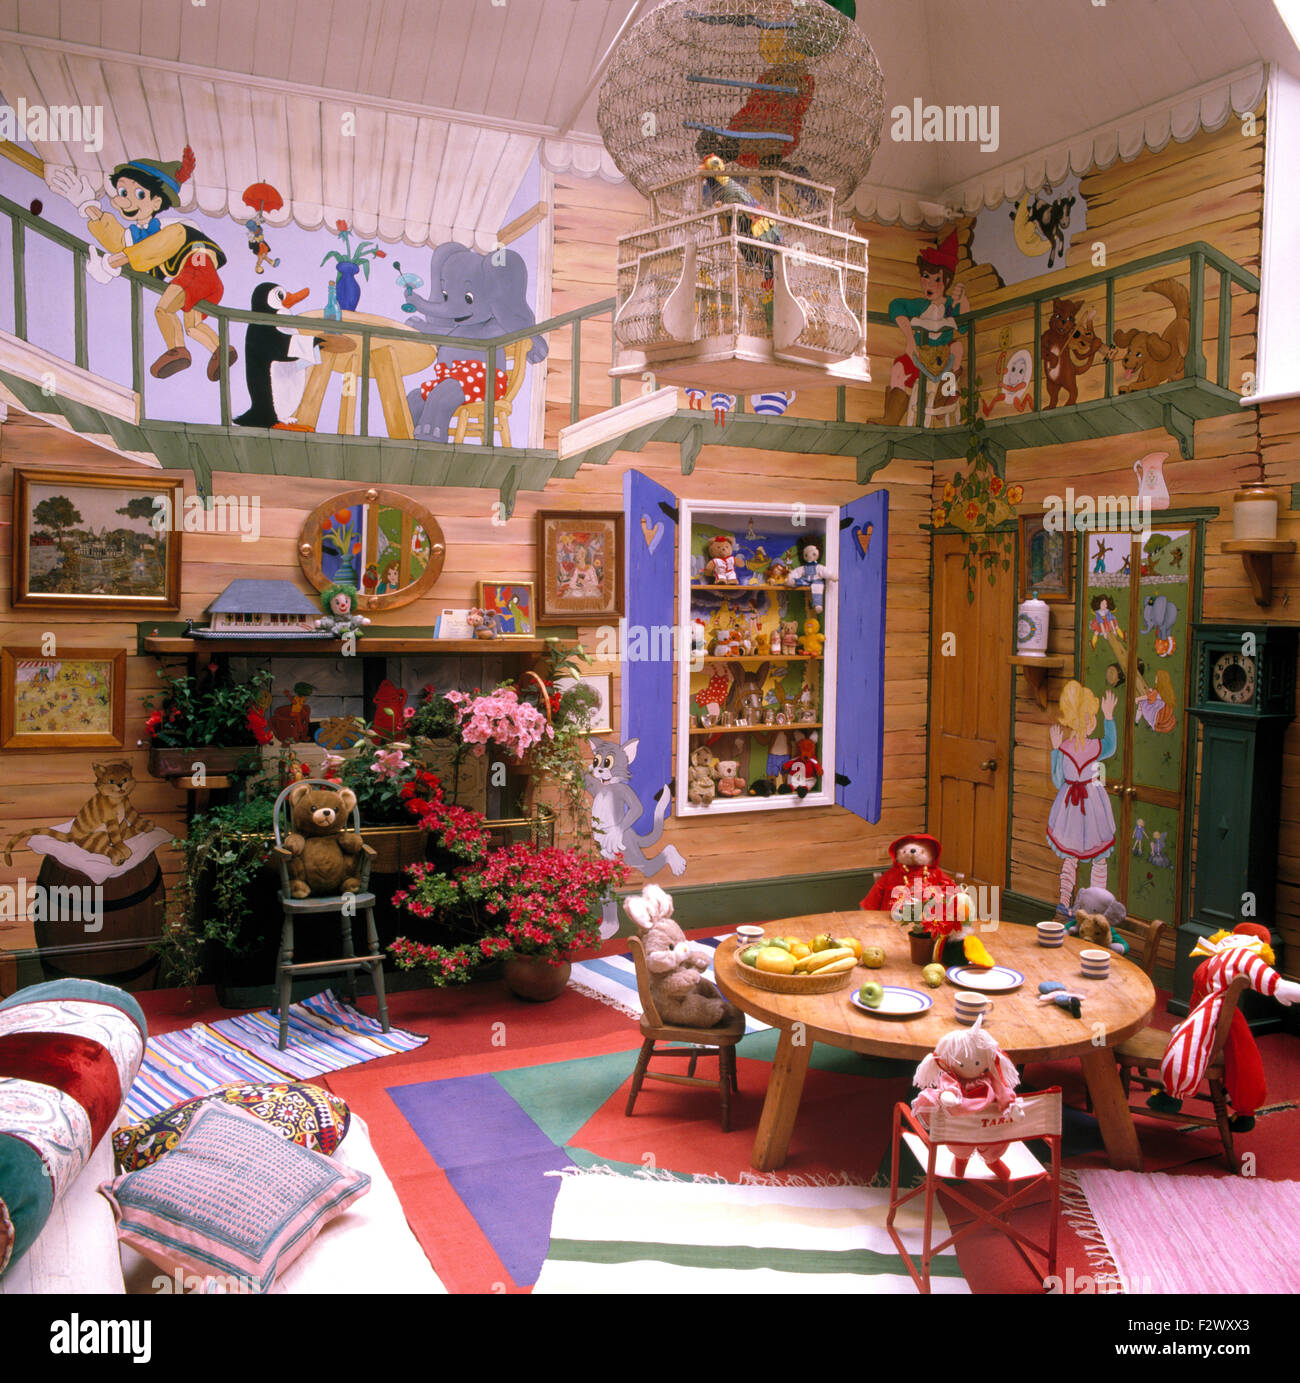 Trompe-l'oeil murals of cartoon characters on the wall of children's cluttered eighties bedroom Stock Photo